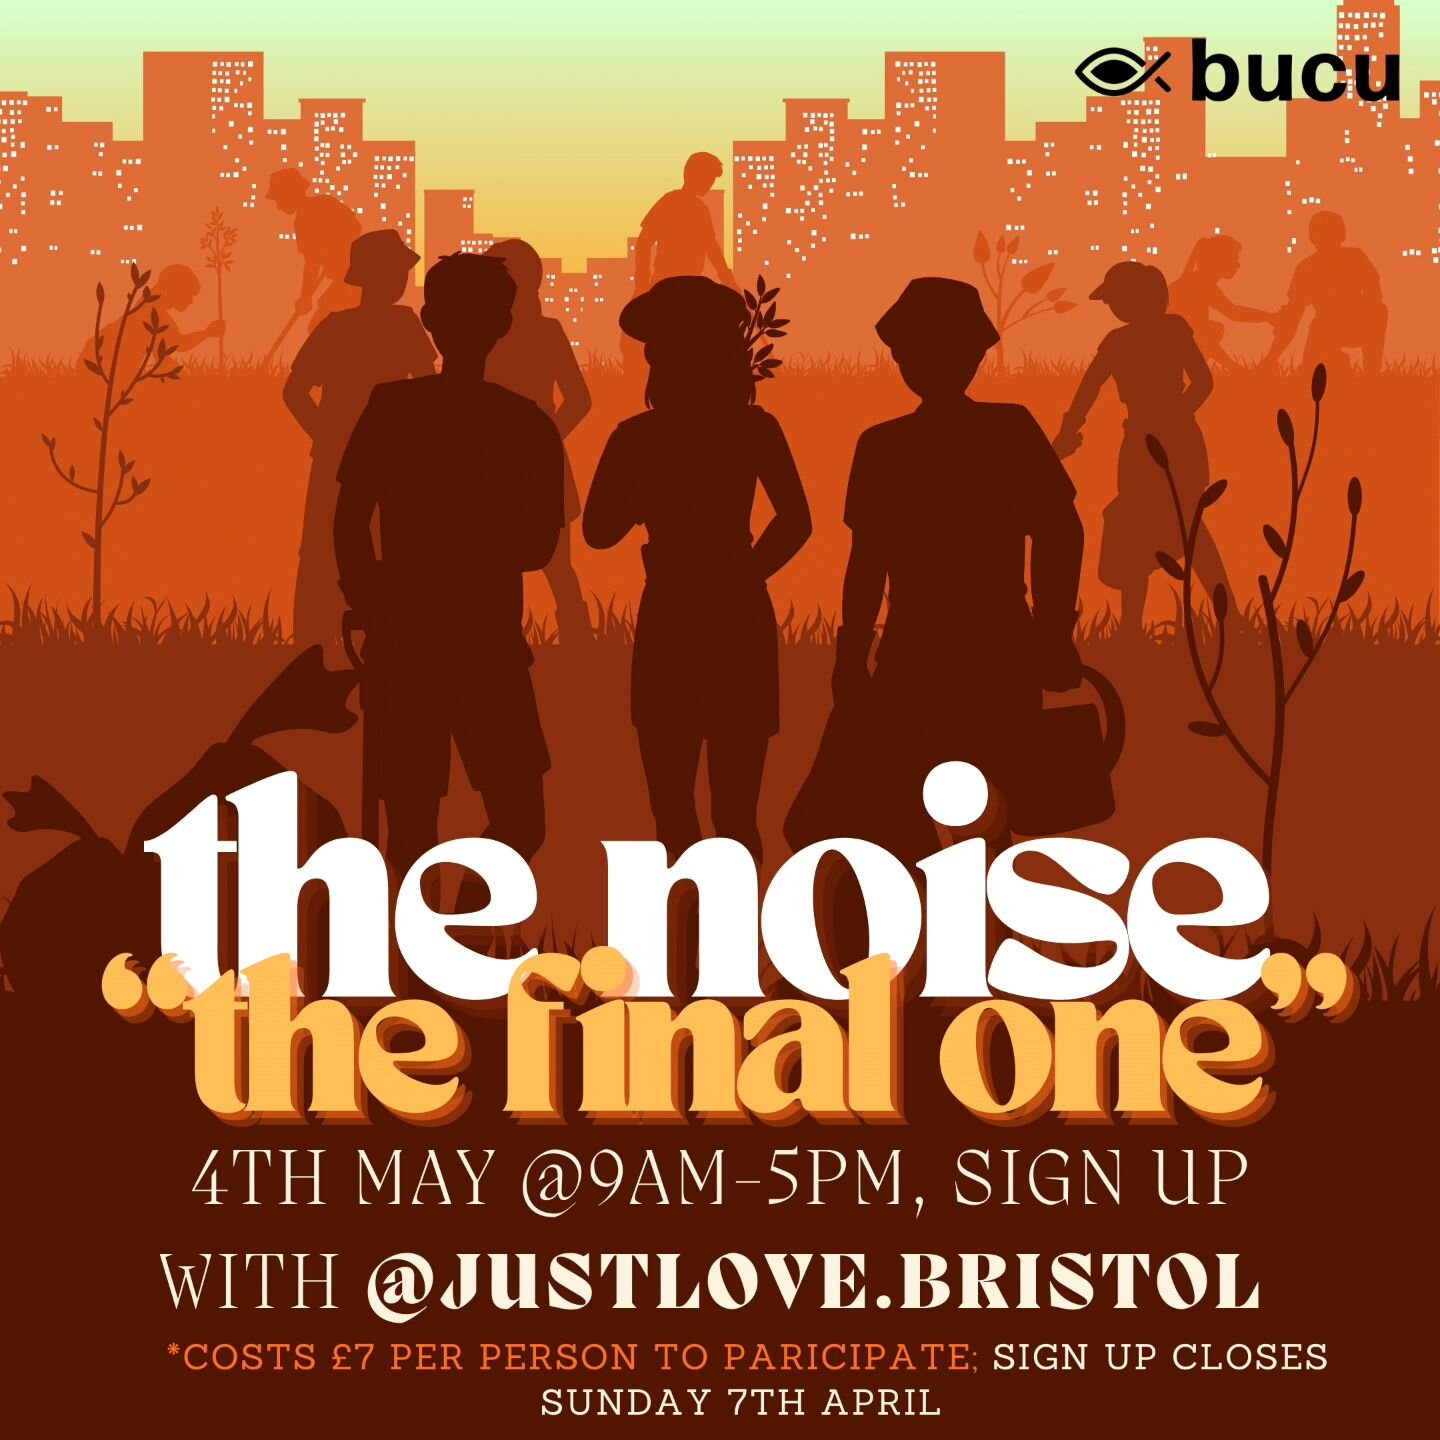 Interested in showing God's love in a practical way? Join JustLove as they volunteer at the final running of The Noise Bristol! With projects all over the city, the weekend is aimed at serving our neighbours (the Bristol community) through gardening,